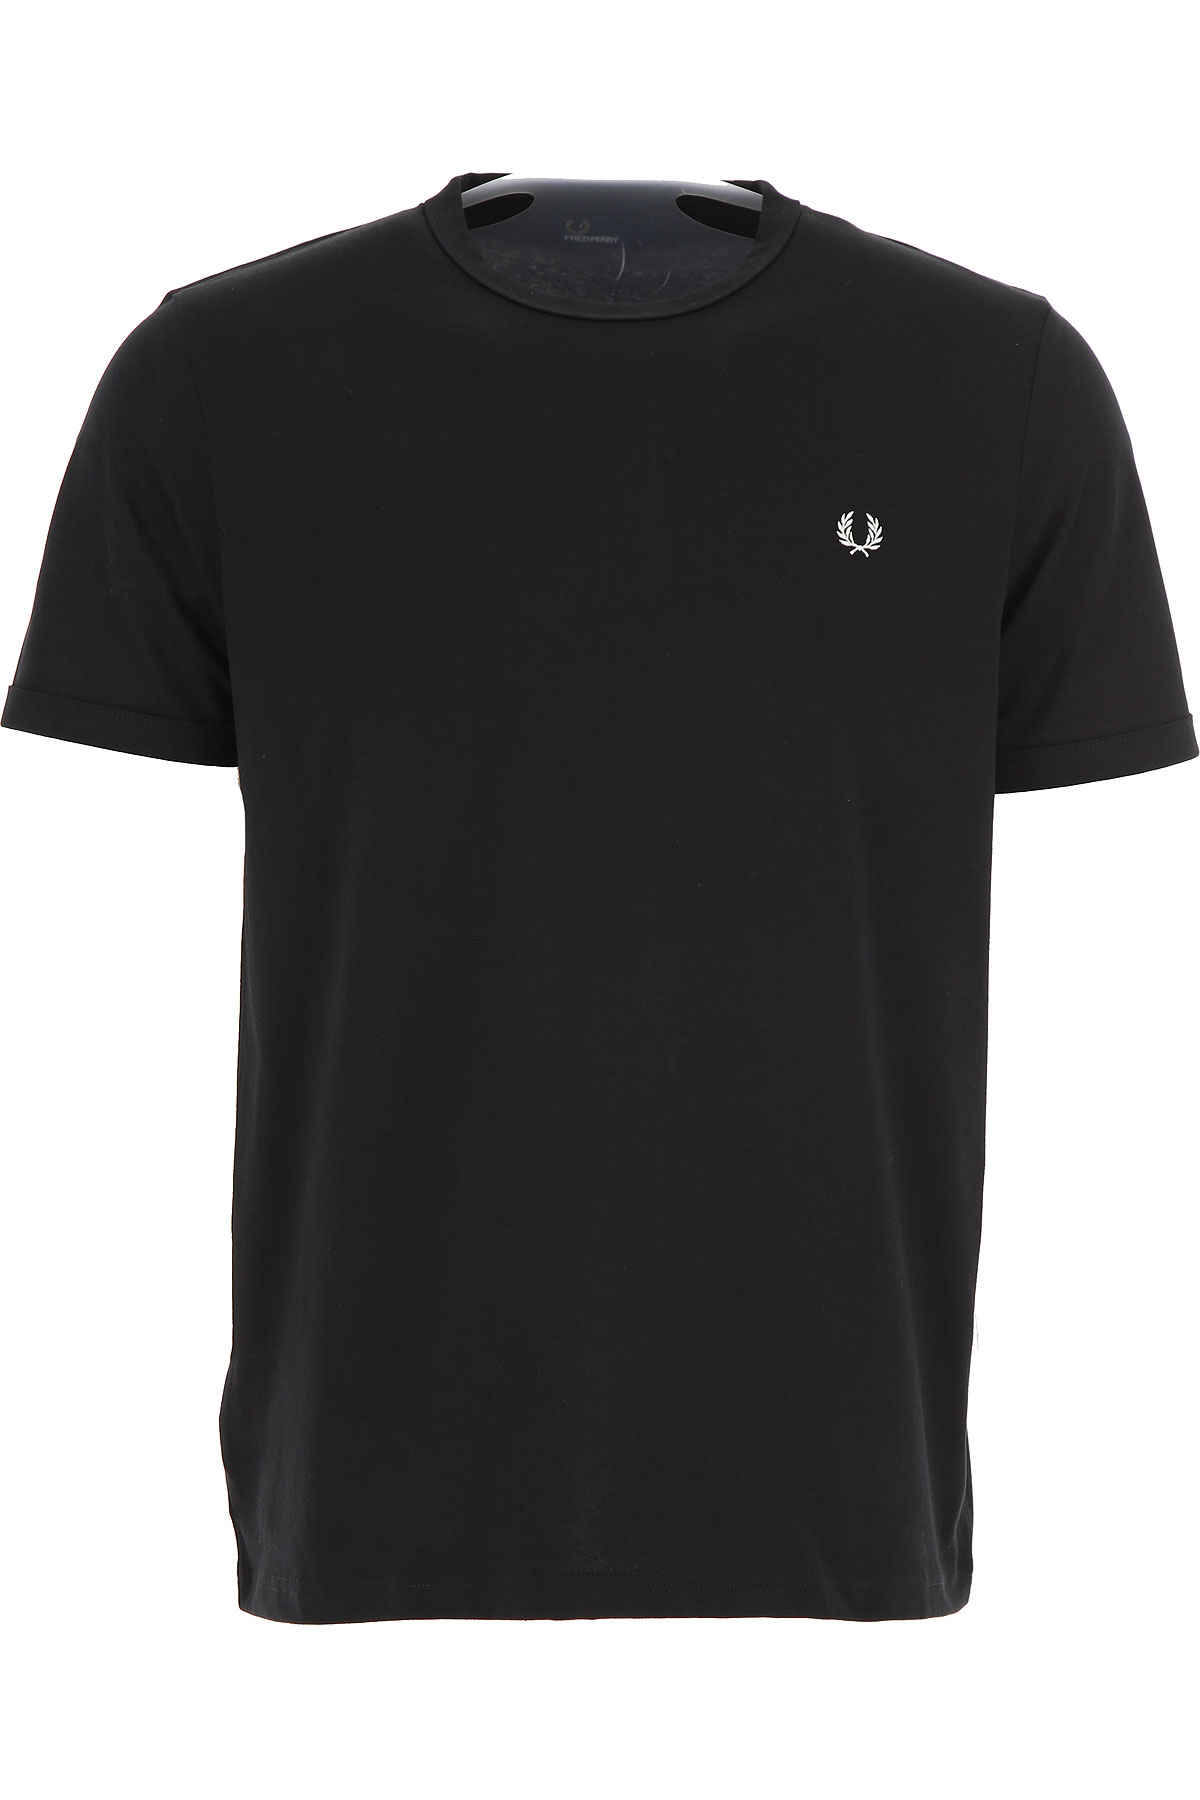 Mens Clothing Fred Perry, Style code: m3519-102-